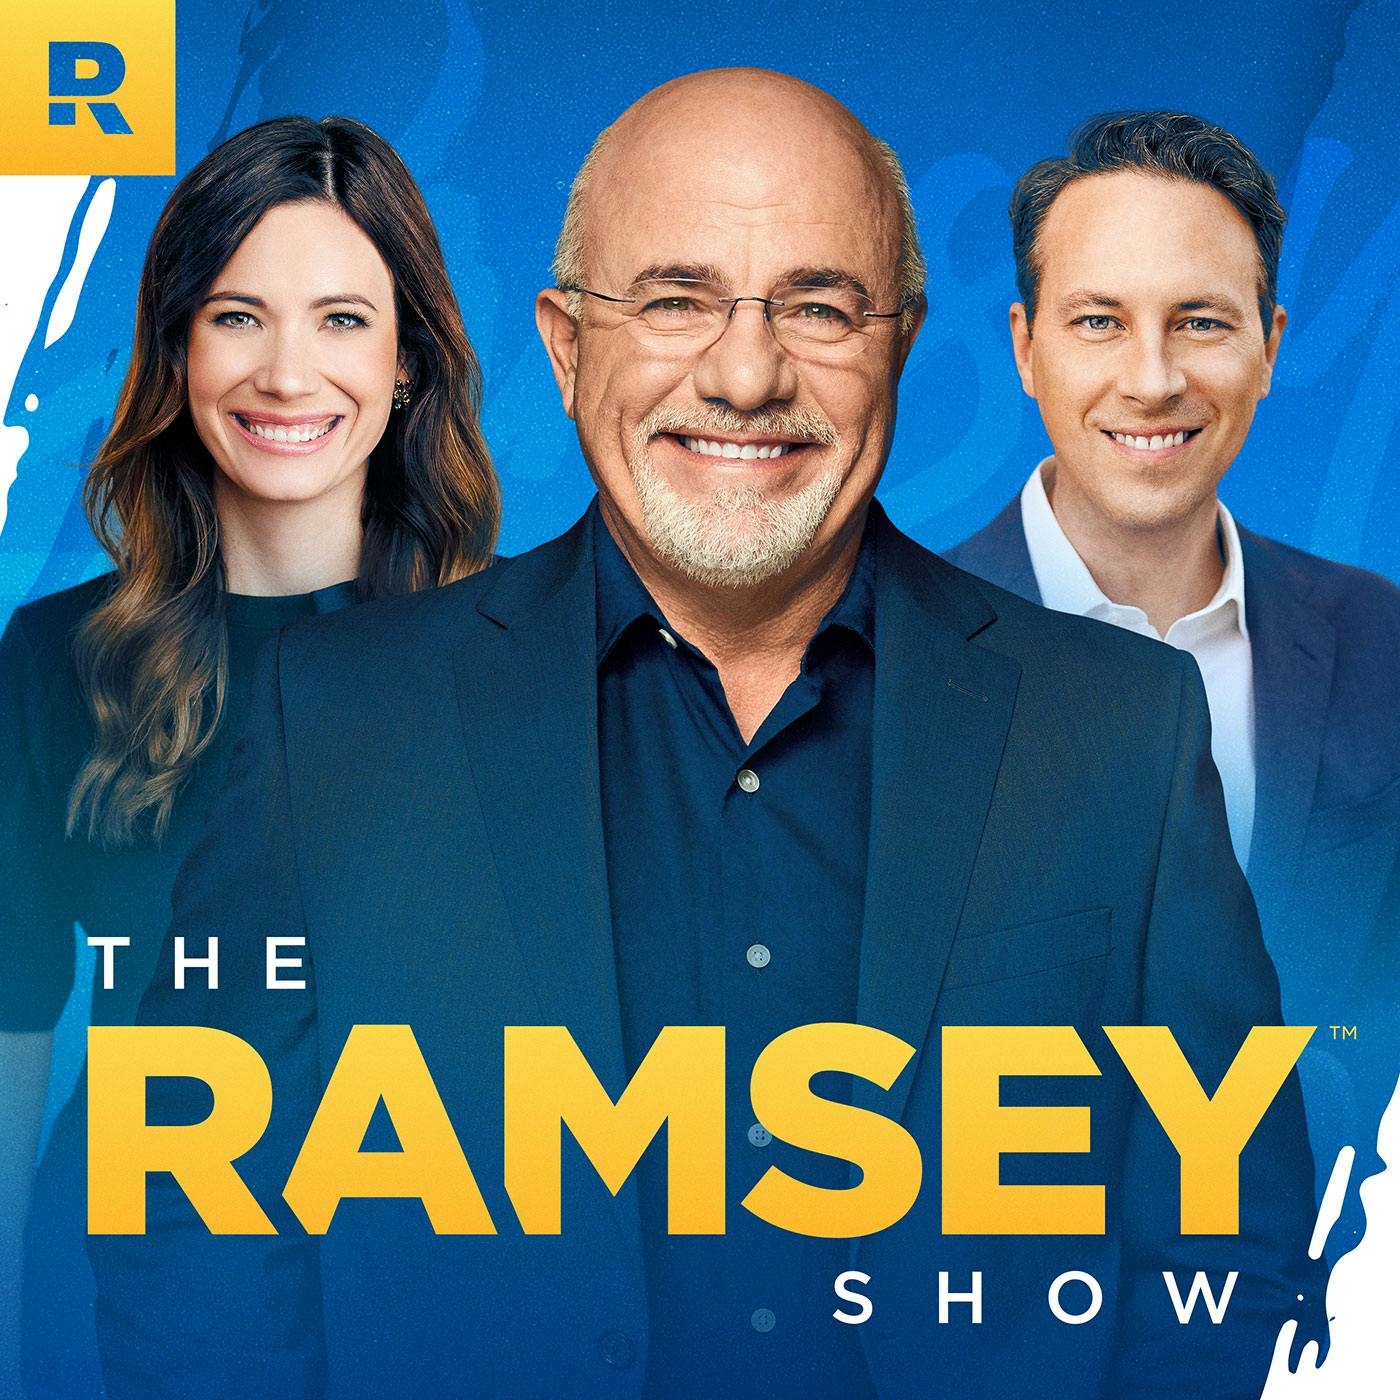 Personal Finance Is 20% Knowledge, 80% Behavior by Ramsey Network